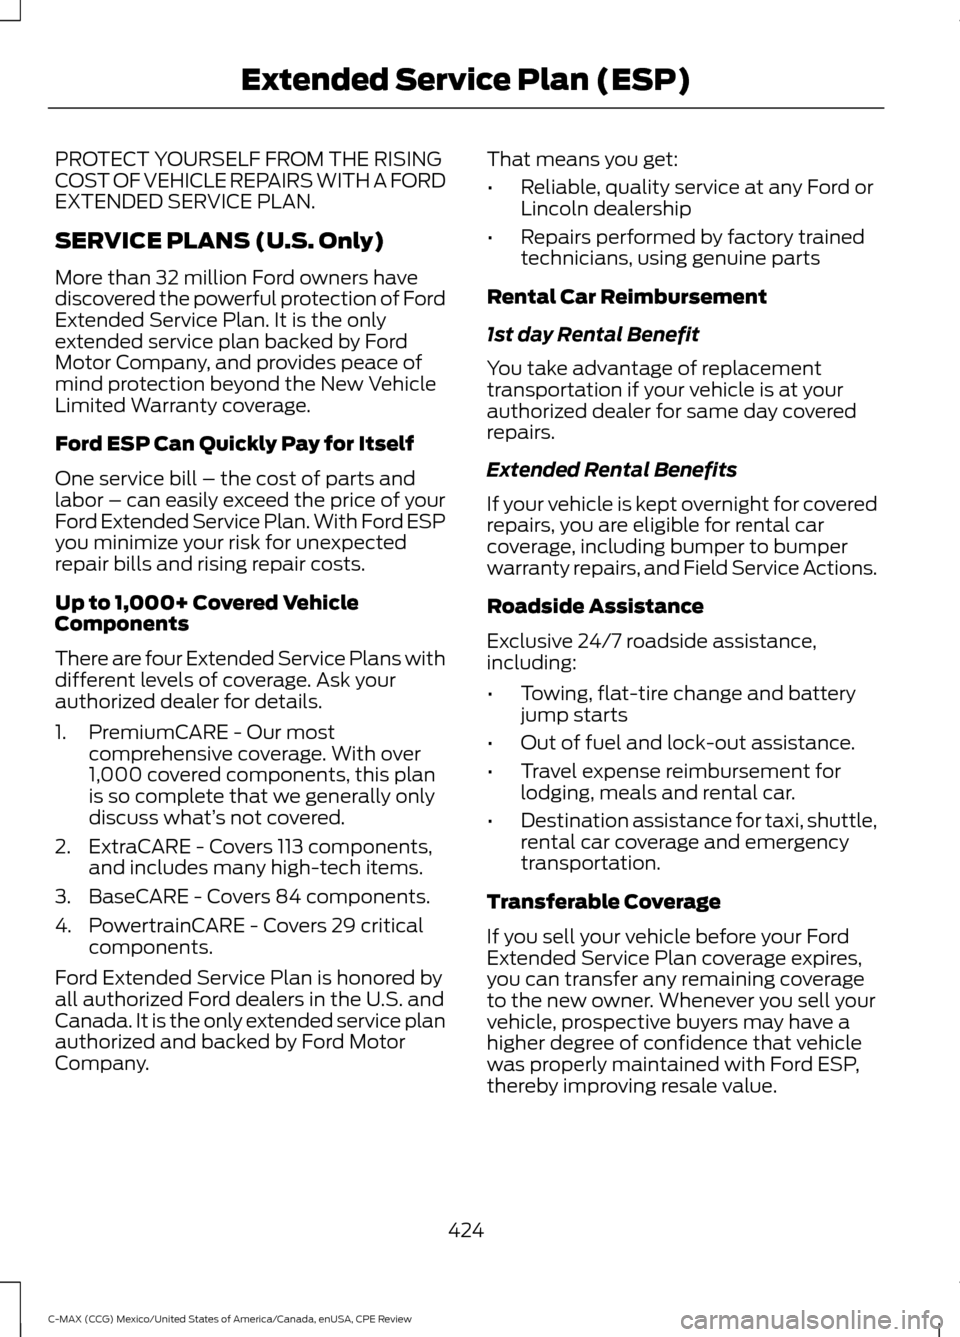 FORD C MAX HYBRID 2015 2.G Manual PDF PROTECT YOURSELF FROM THE RISING
COST OF VEHICLE REPAIRS WITH A FORD
EXTENDED SERVICE PLAN.
SERVICE PLANS (U.S. Only)
More than 32 million Ford owners have
discovered the powerful protection of Ford
E